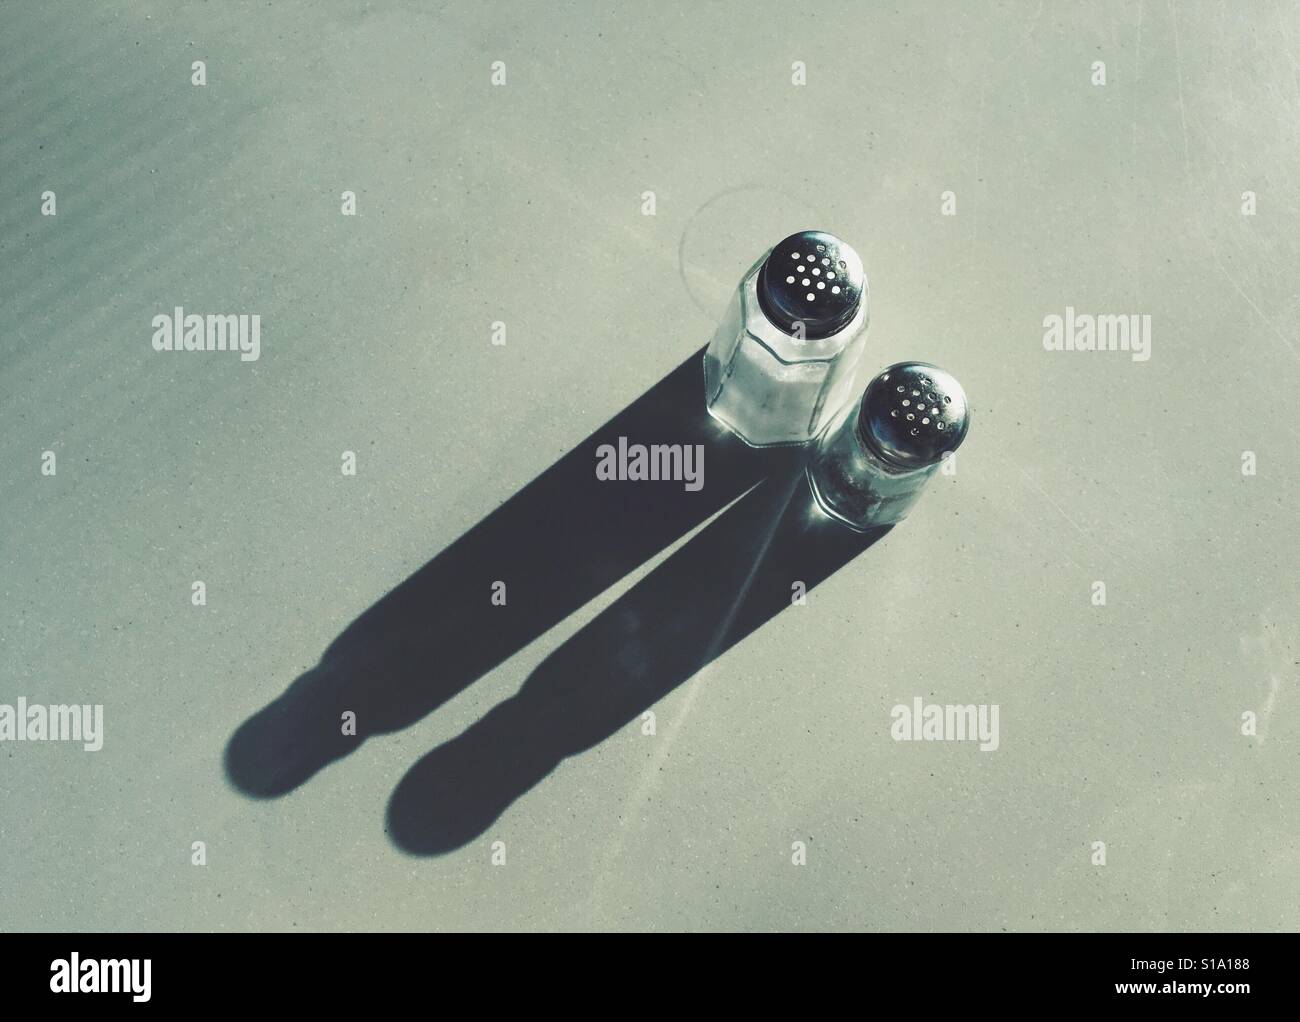 High angle view of salt and pepper shakers casting long shadows on a table Stock Photo